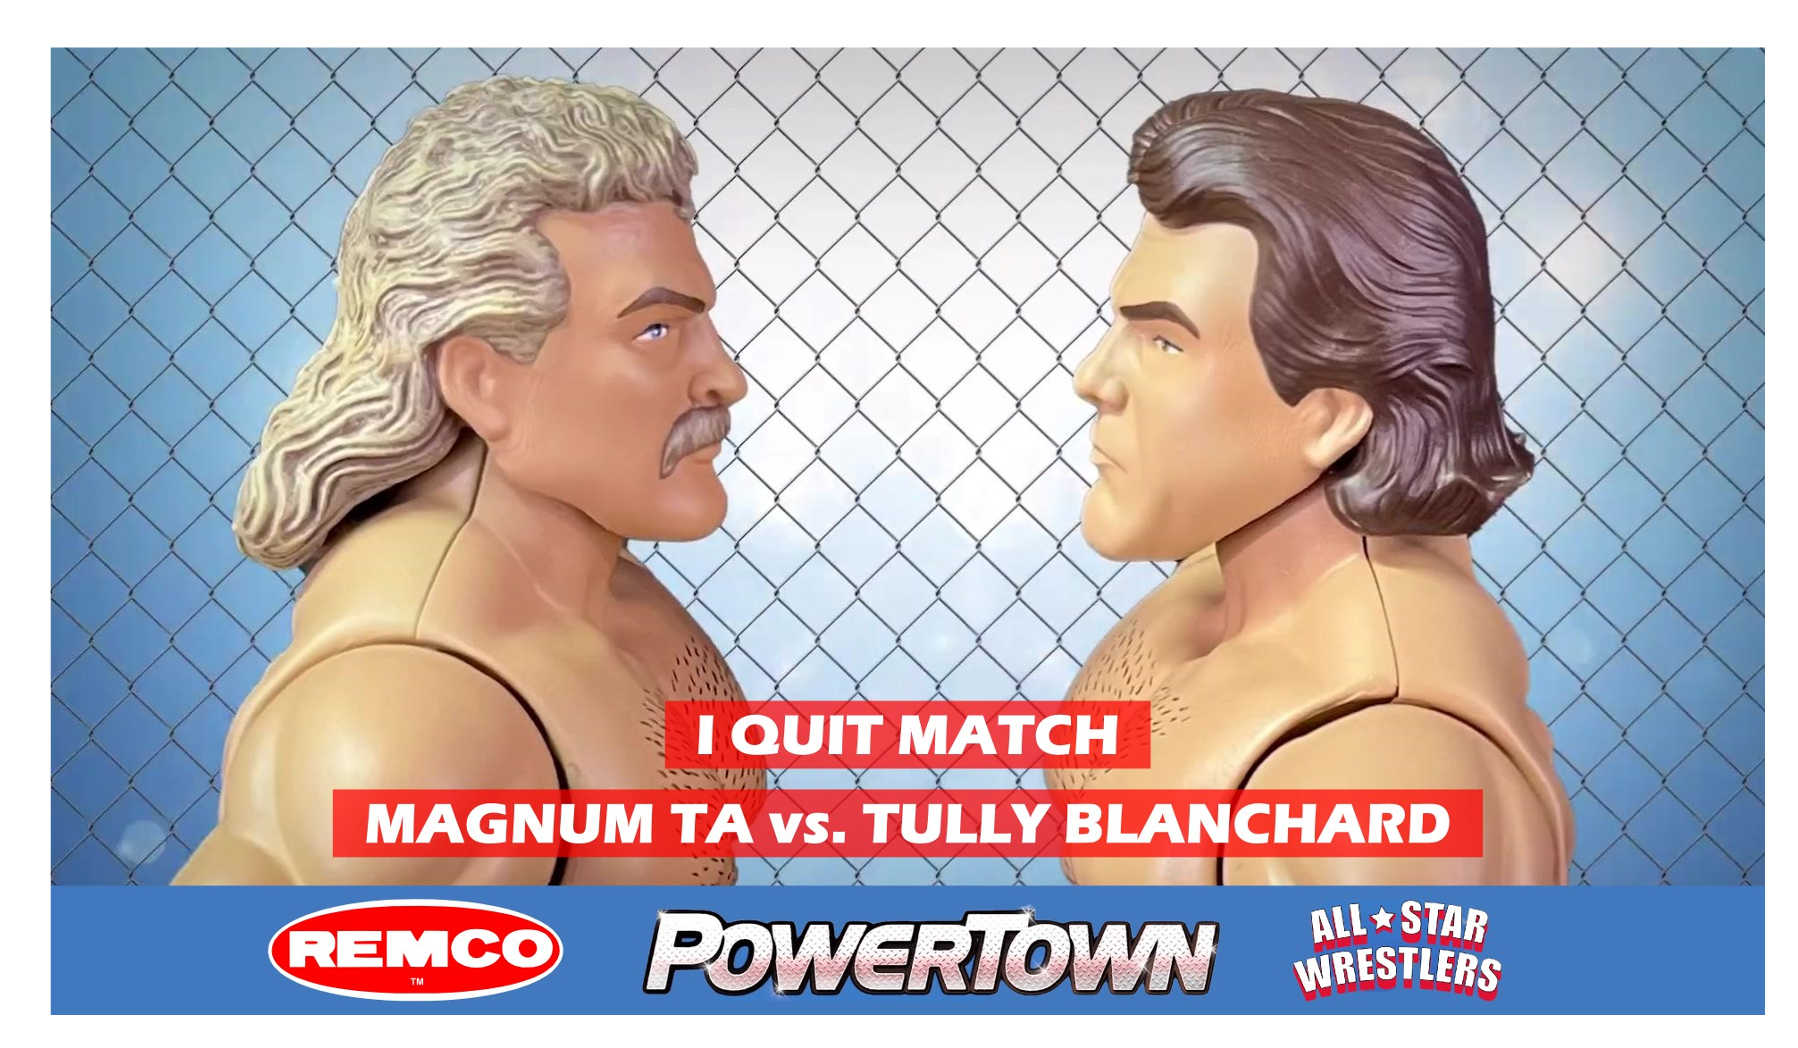 Remco Wrestling Figures featuring the Powertown All-Star 'I Quit Match' series, showcasing Magnum TA and Tully Blanchard